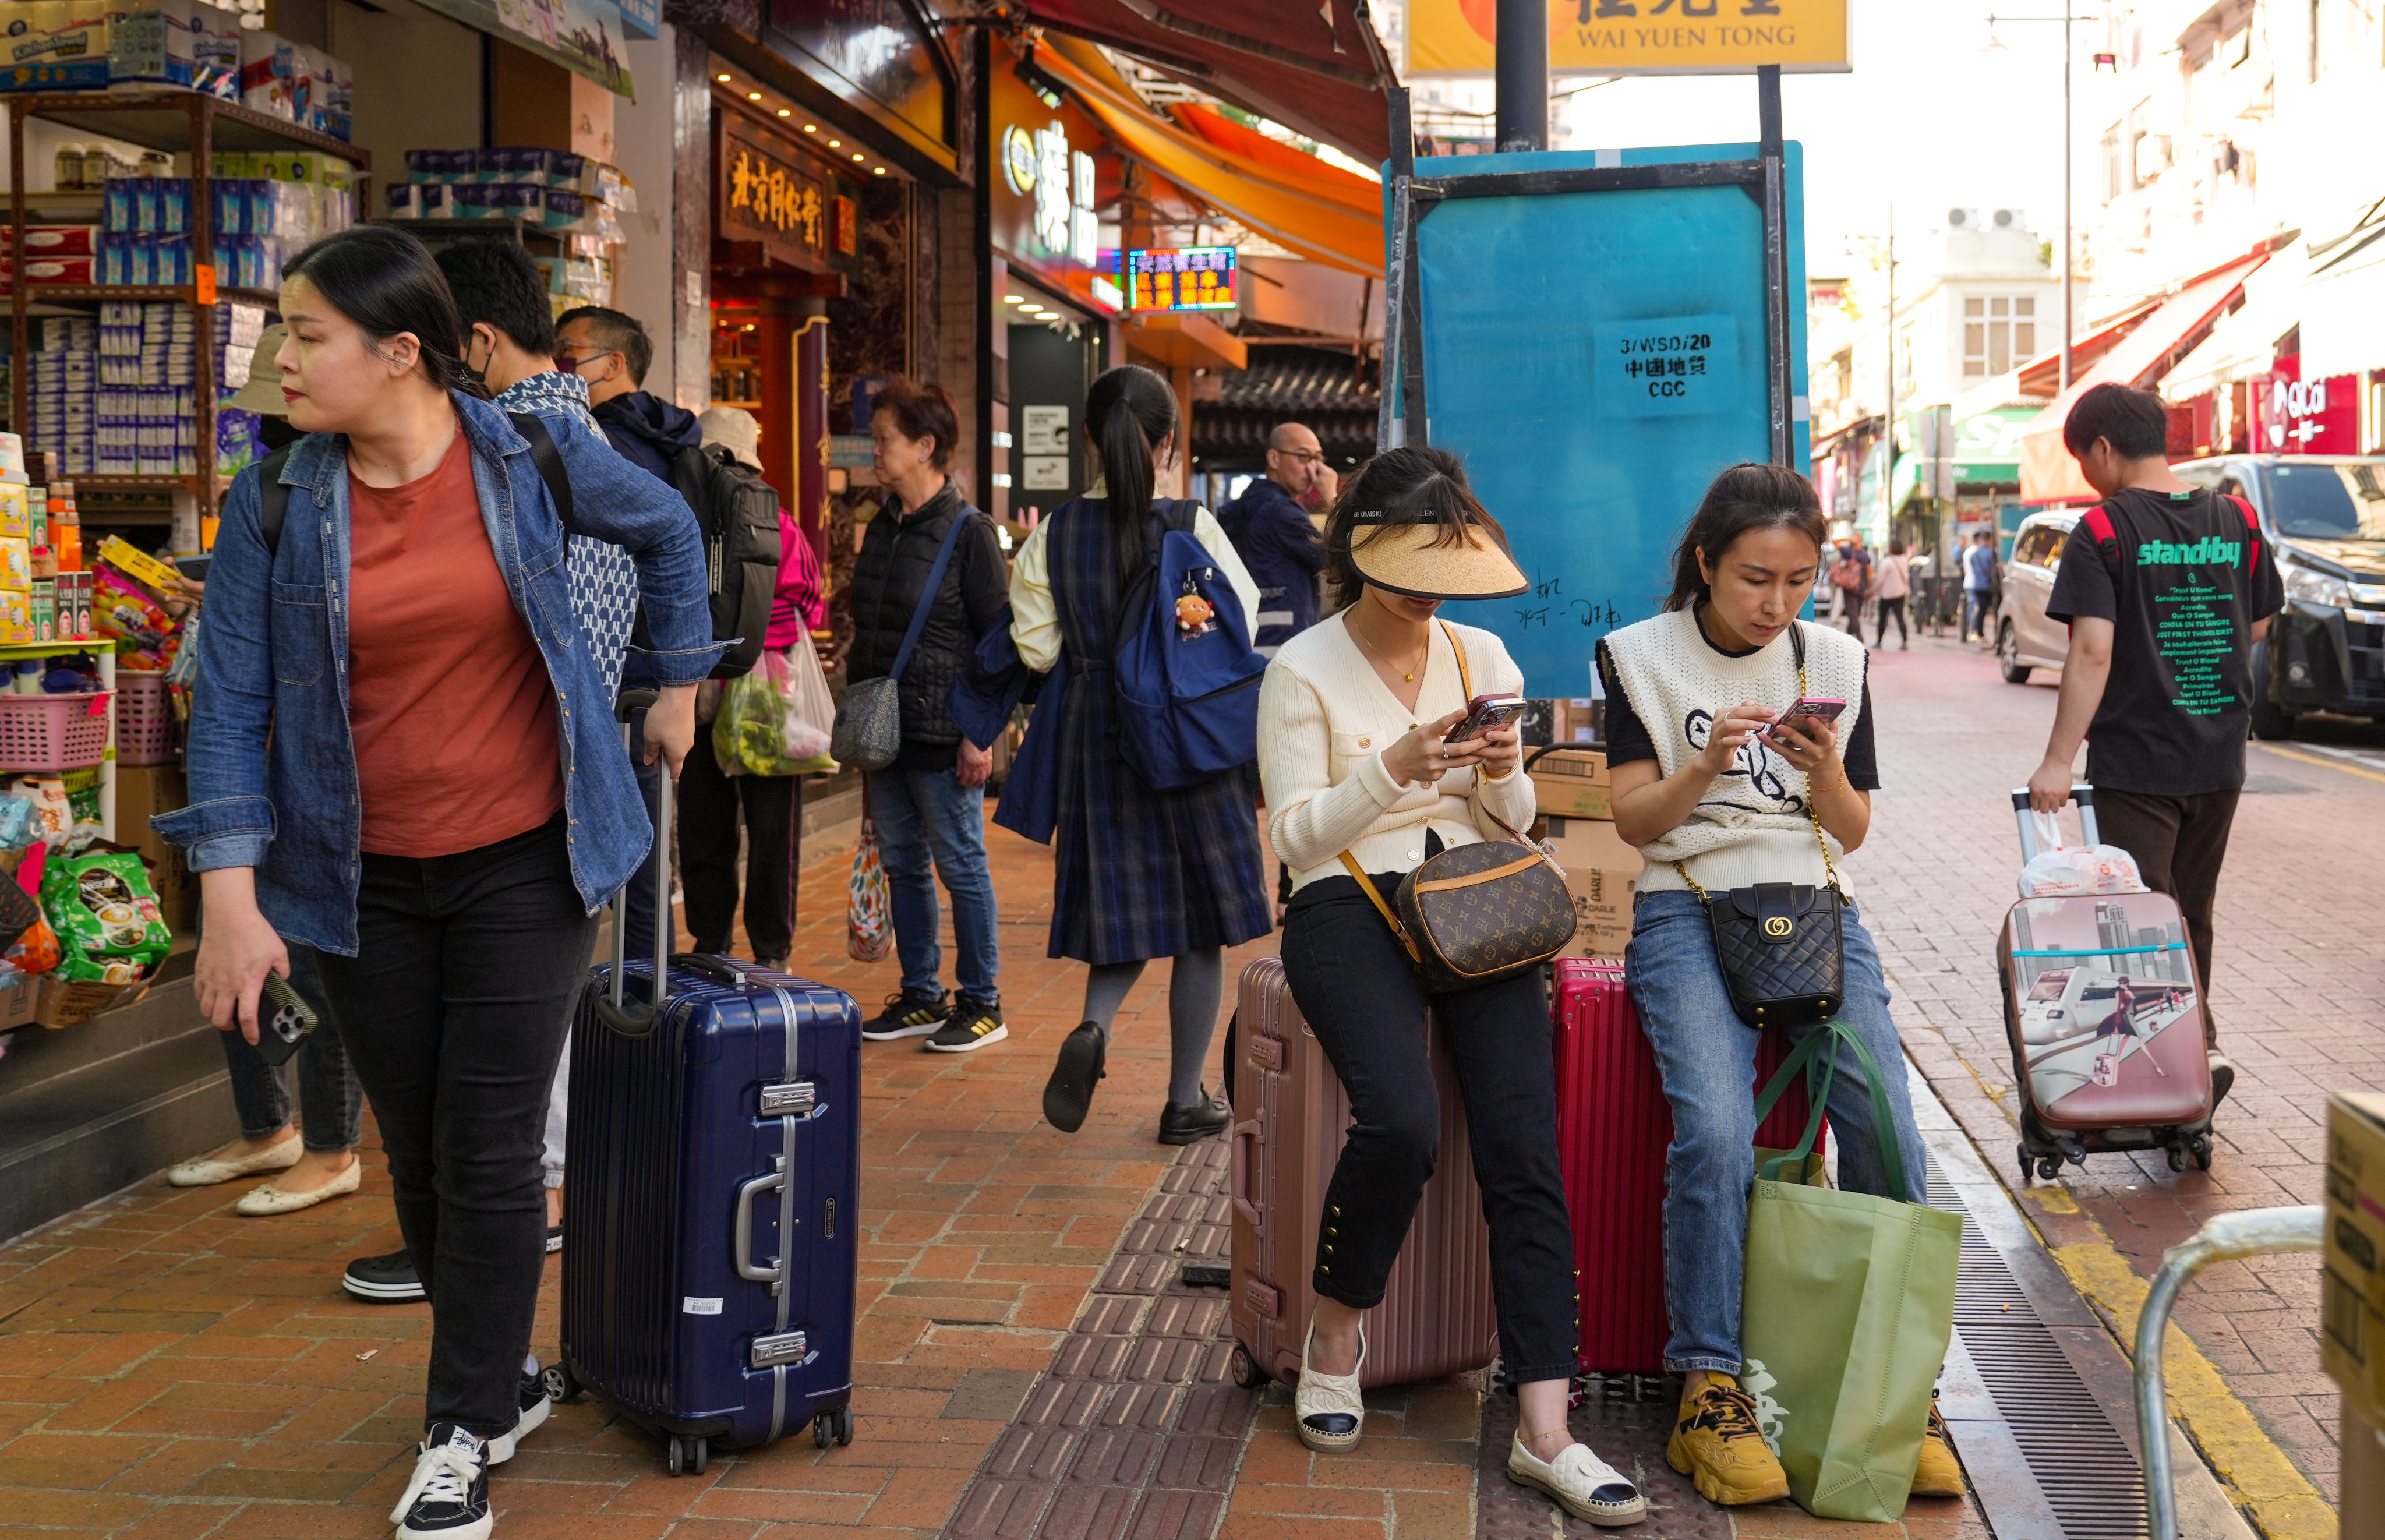 Shoppers in Sheung Shui. More than 26 million mainland Chinese visited Hong Kong last year, about three-fifths of the number who came in 2019. Photo: Sam Tsang